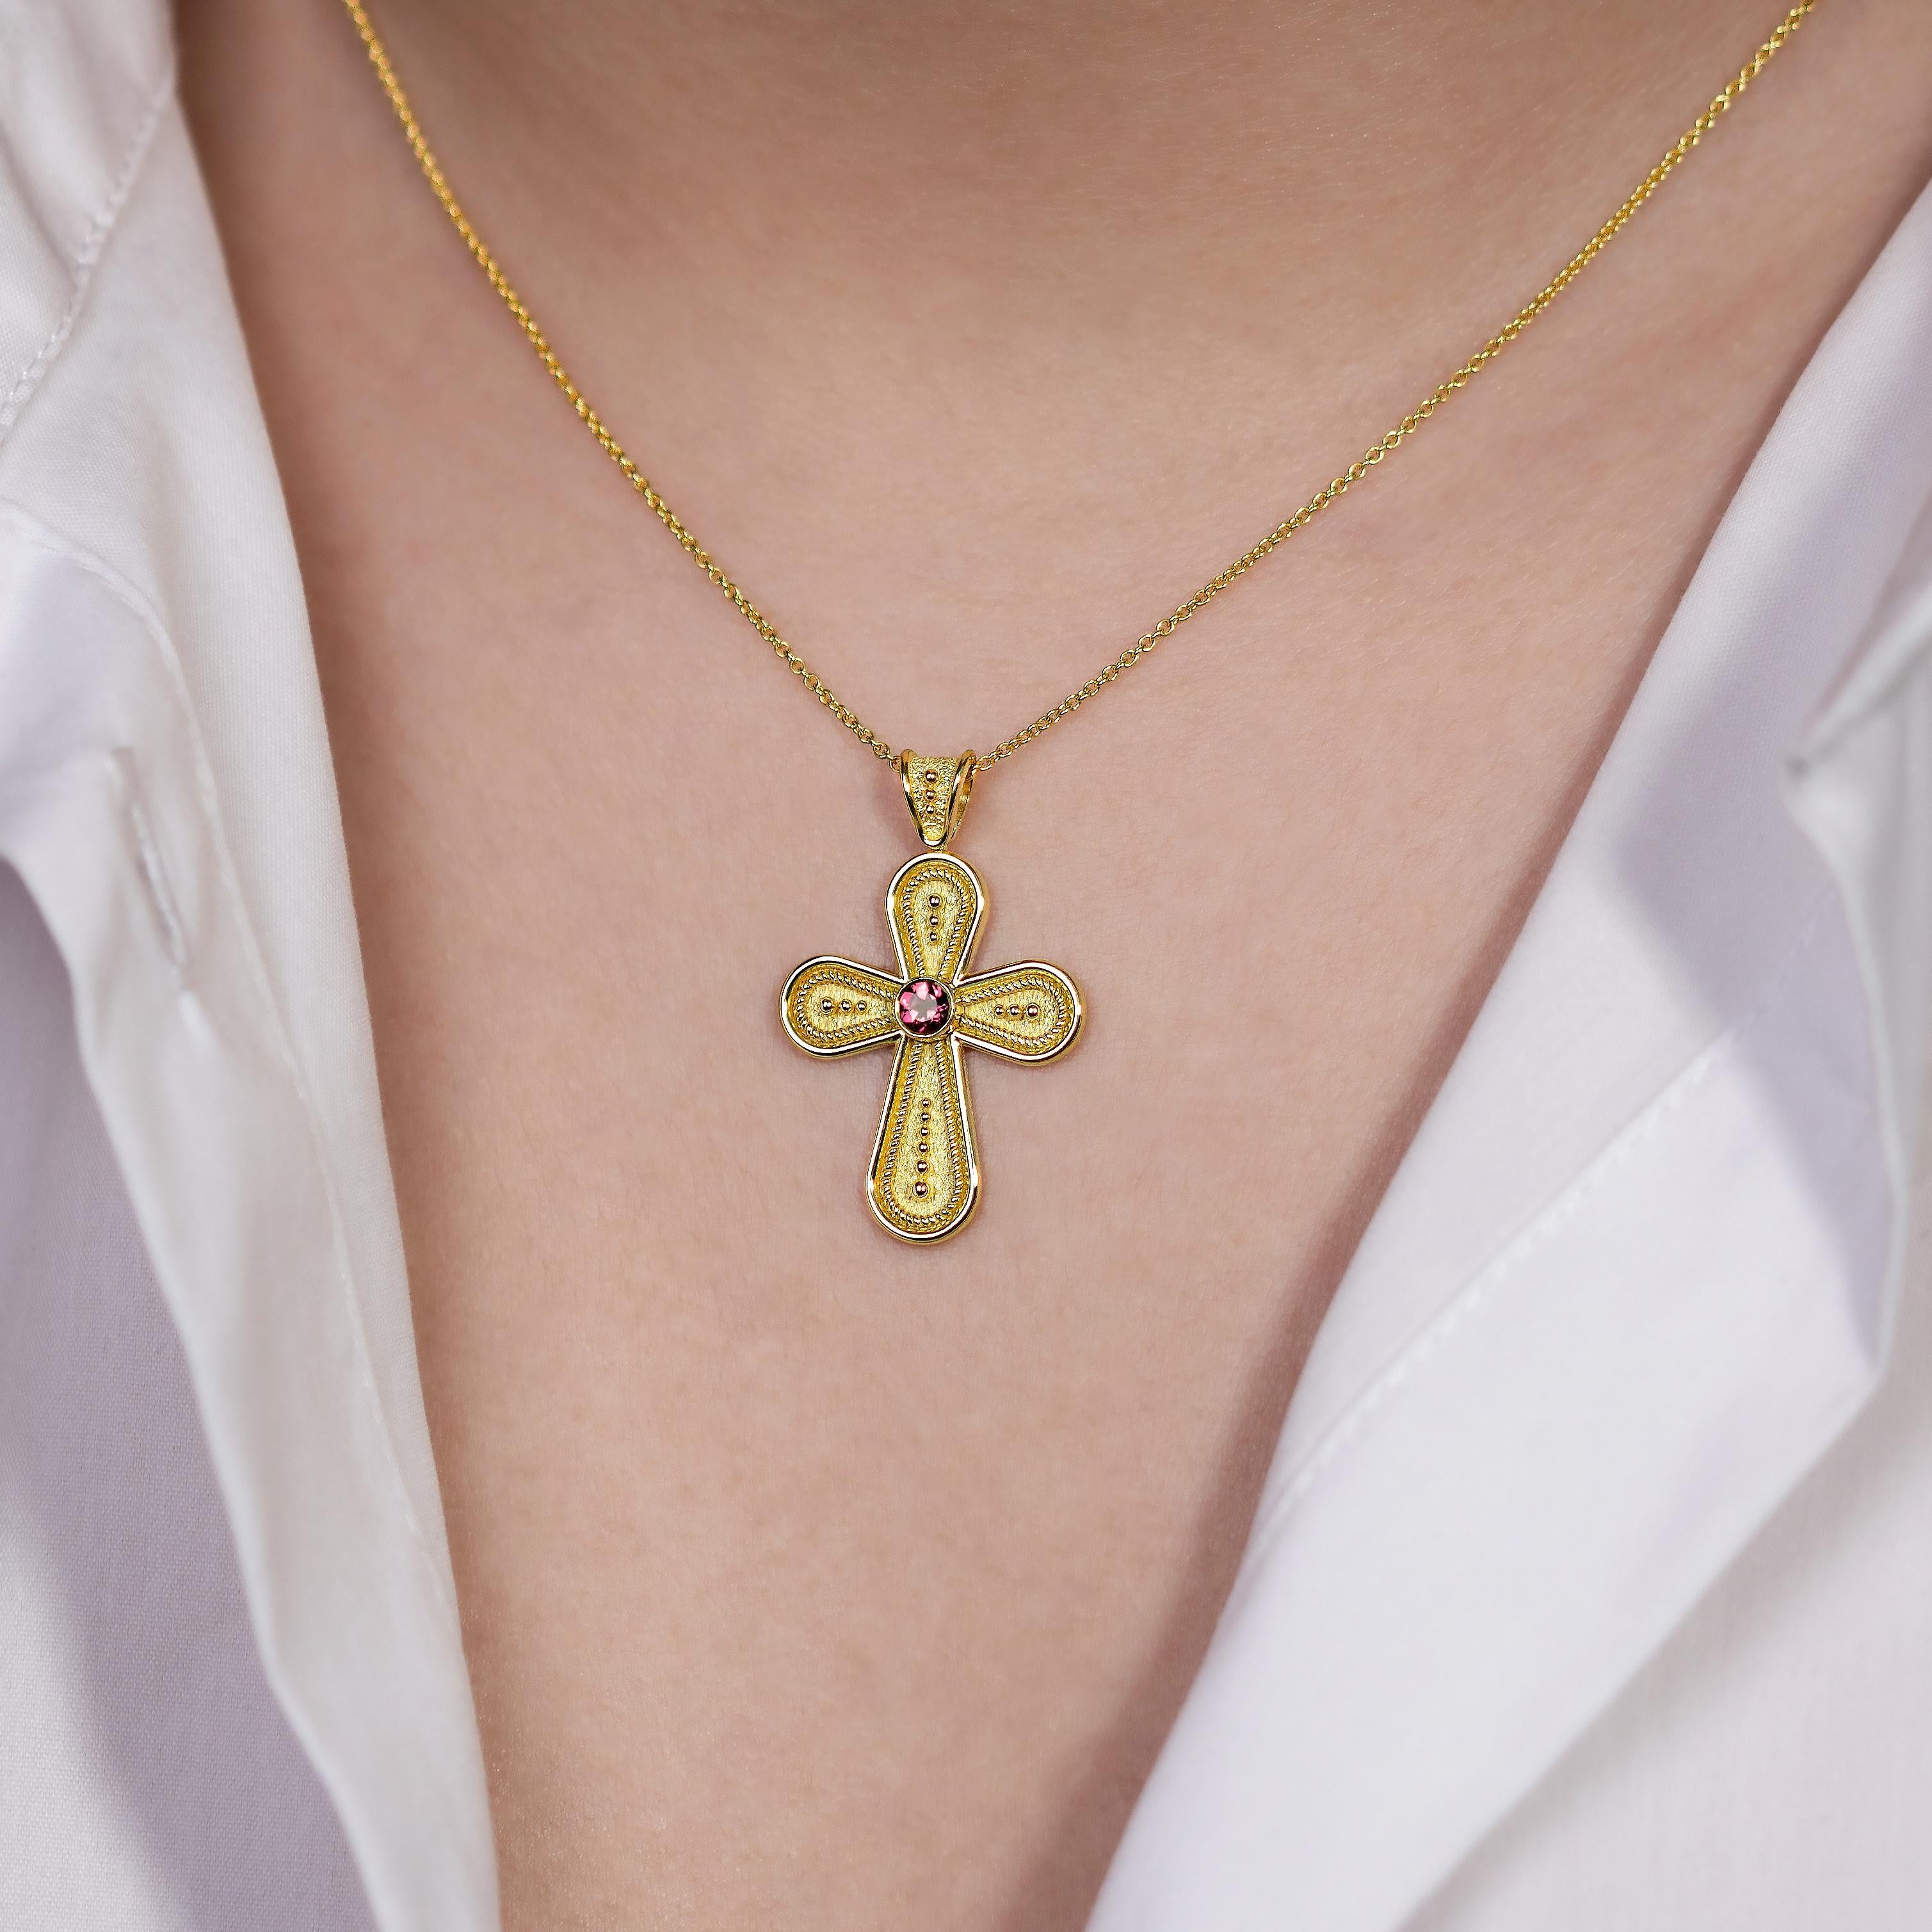 Adorn yourself with a rounded cross pendant, where a serene pink tourmaline graces the center amidst a gradient of delicate granulations—a beautiful symbol of faith and graceful elegance.

100% handmade in our workshop.

Metal: 18K Gold
Gemstones: